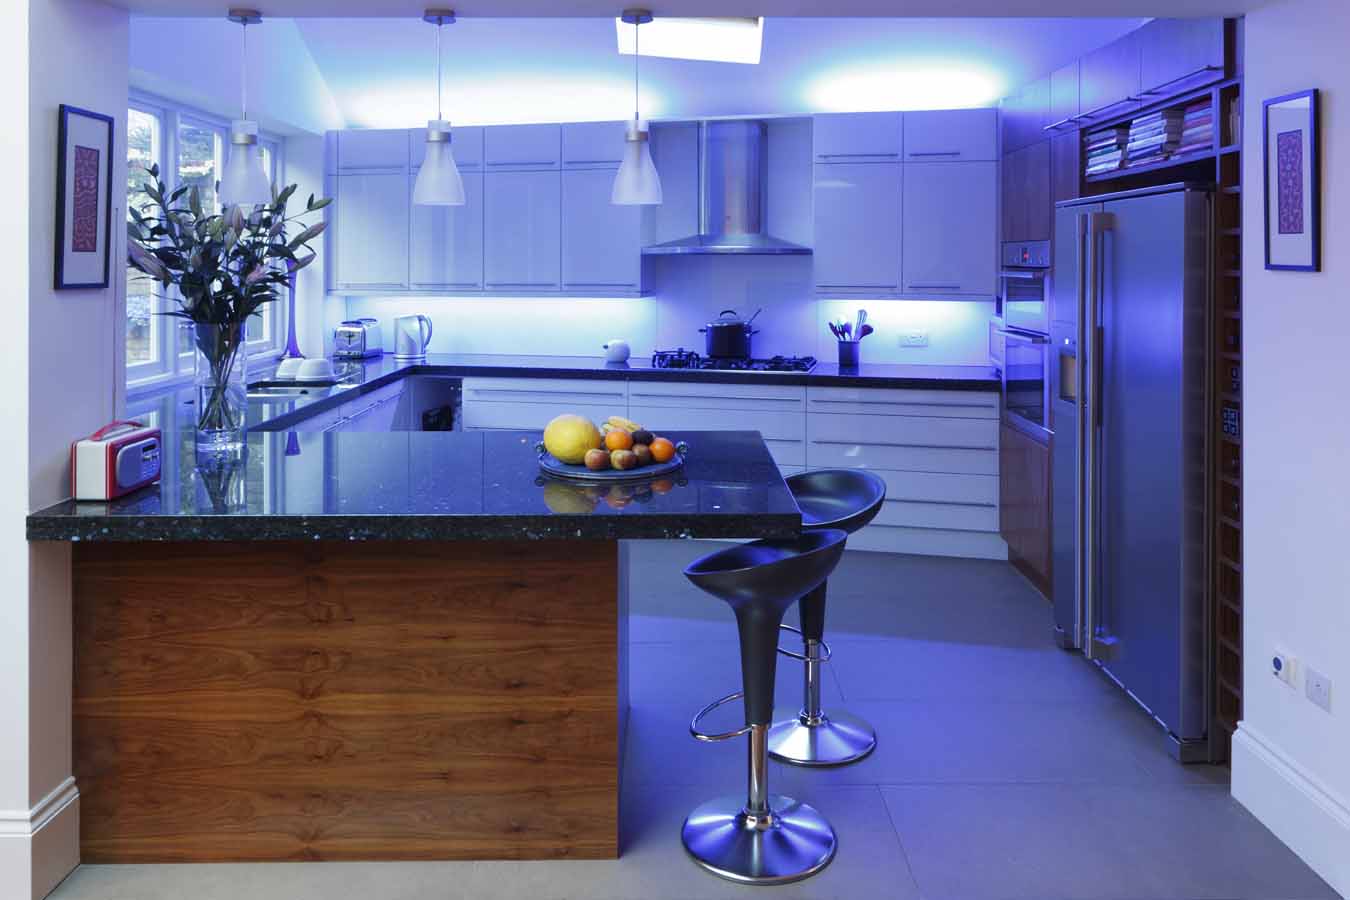 f98dd__Extraordinary-Small-Kitchen-With-Blue-LED-Lighting